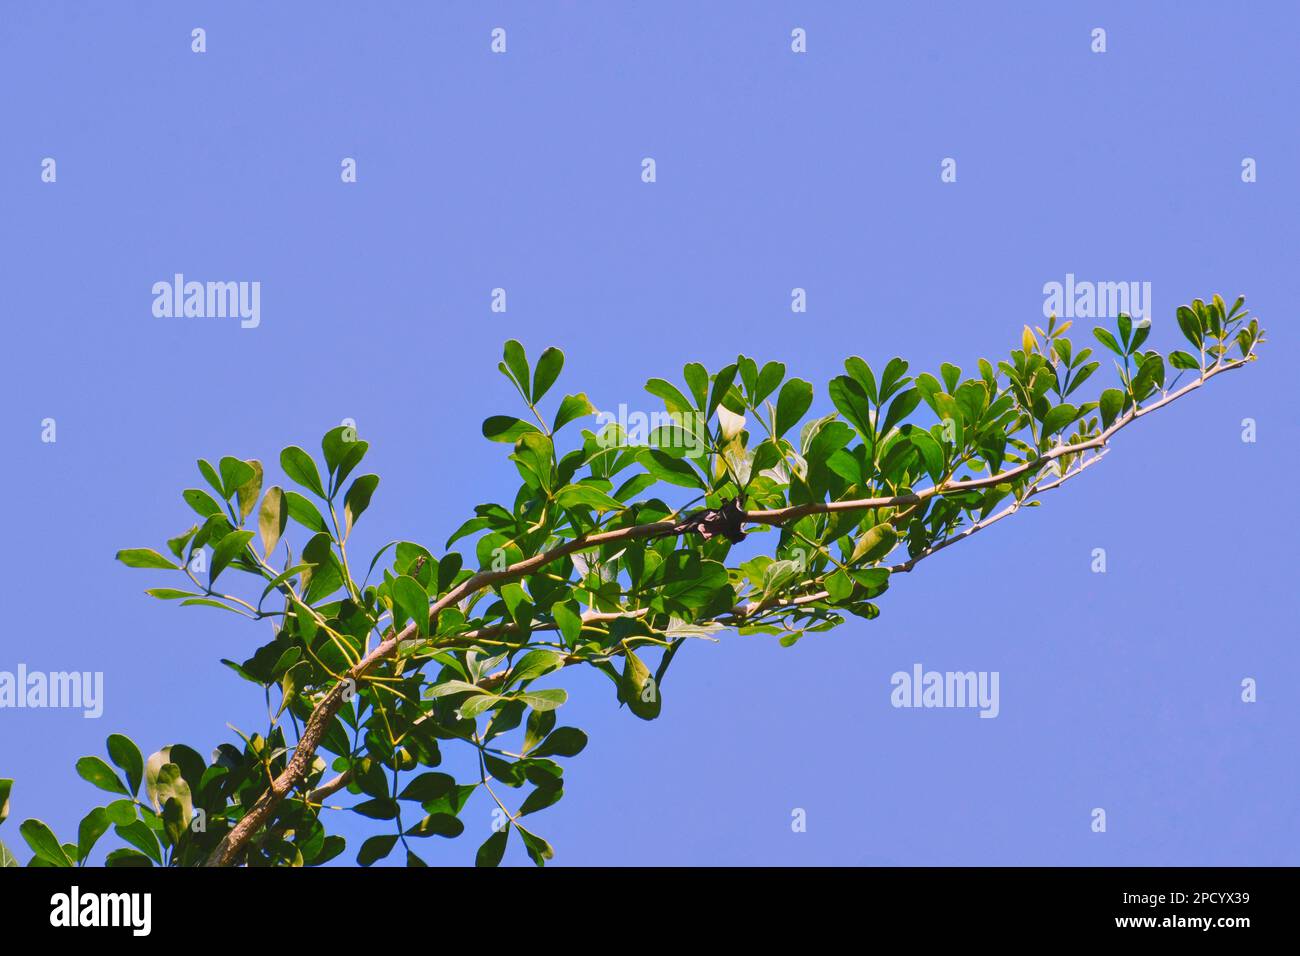 Elephant wood apple branch full of beautiful green leaves trying to reach the blue sky. Stock Photo